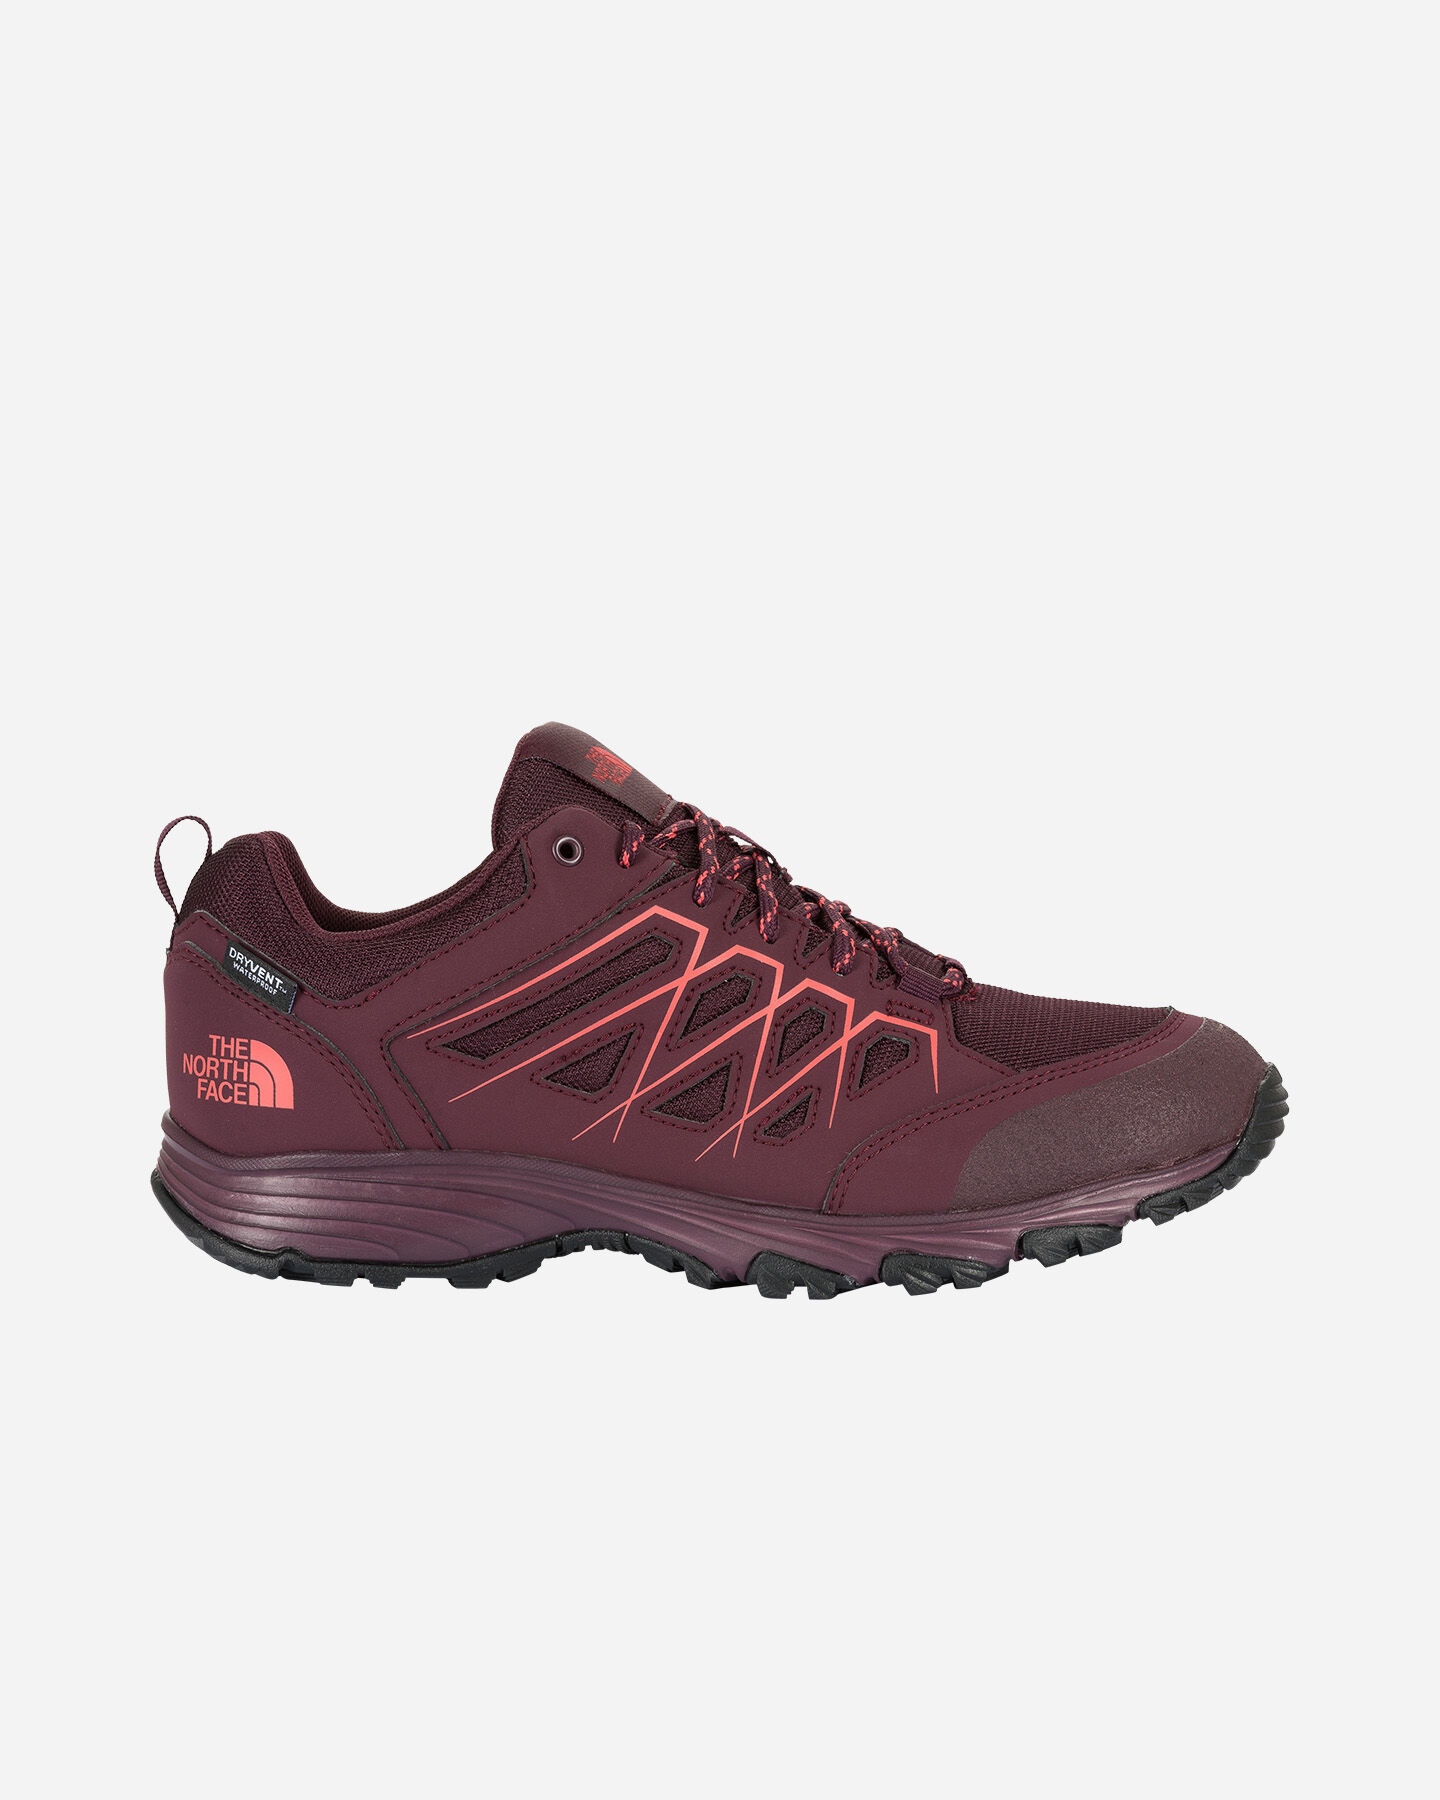  Scarpe trail THE NORTH FACE VENTURE FASTHIKE WP W S5181629|RB3|5 scatto 0